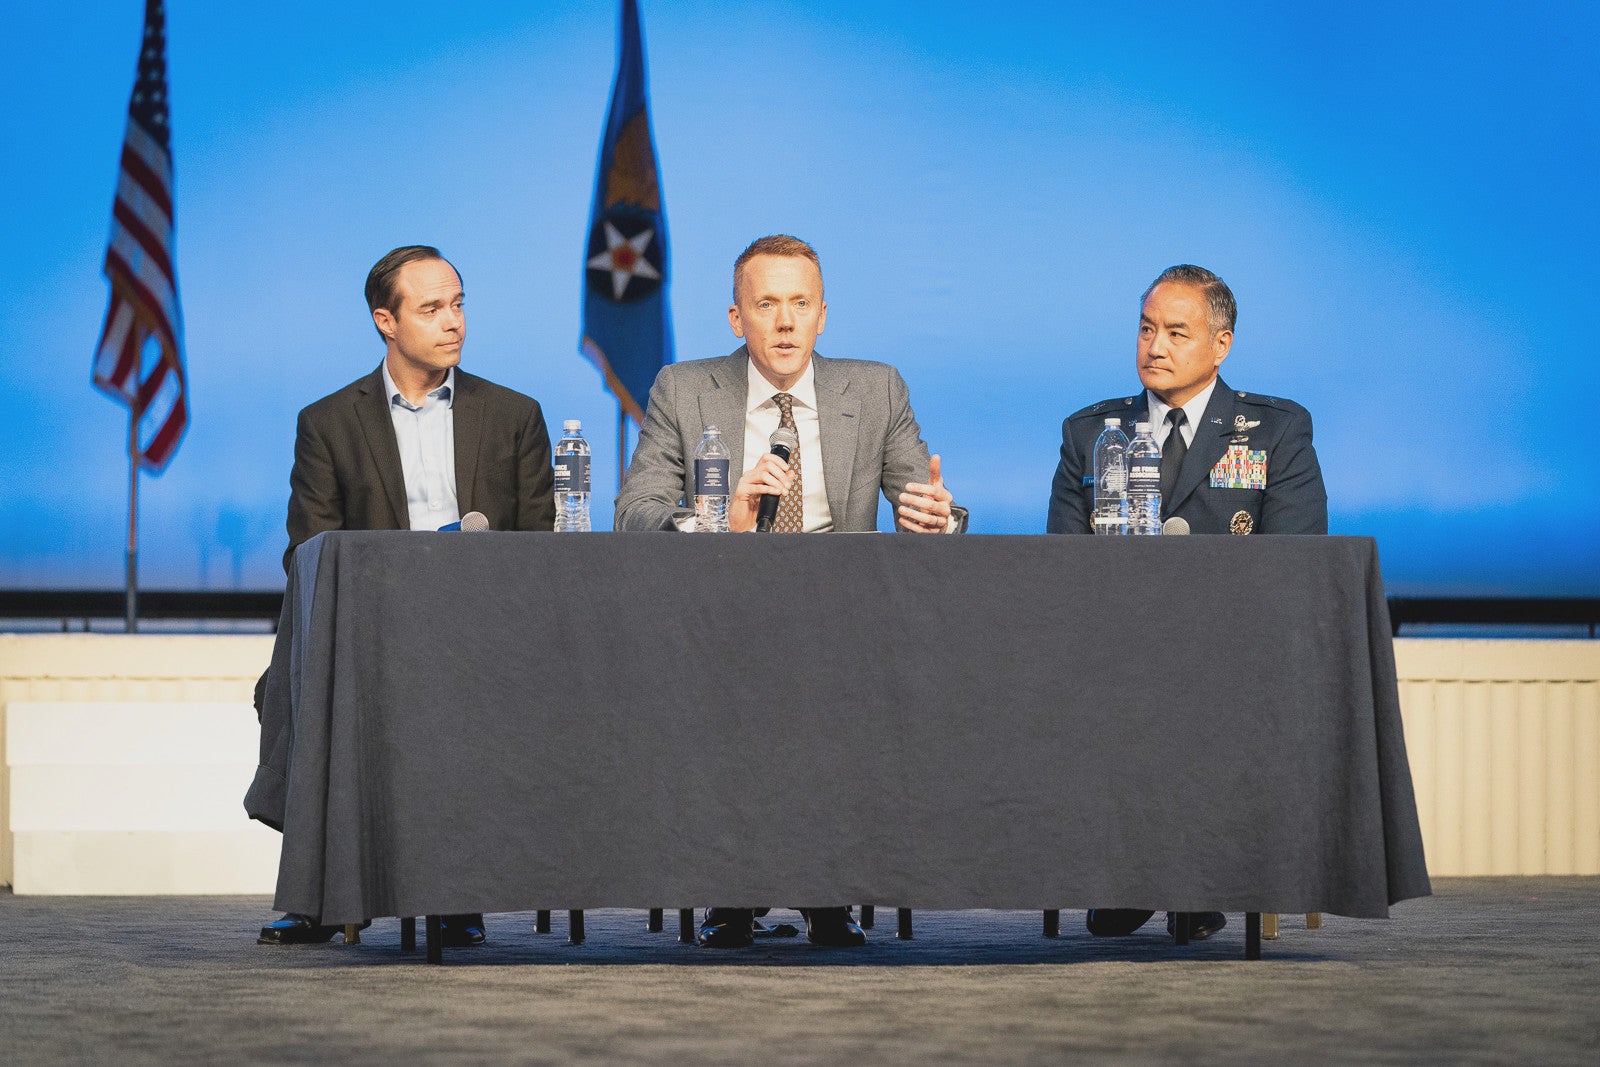 U.S. Air Force Brig Gen. David J. Kumashiro, Joint Force Integration director, Deputy Chief of Staff for Strategy, Integration and Requirements; Preston Dunlap and Chris Brose discuss demystifying Multi-Domain Command and Control during the Air Force Association Air, Space and Cyber Conference in National Harbor, Md., Sept. 17, 2019. The ASC Conference is a professional development seminar that offers the opportunity for Department of Defense personnel to participate in forums, speeches and workshops.  (U.S. Air Force photo by Tech. Sgt. D. Myles Cullen)